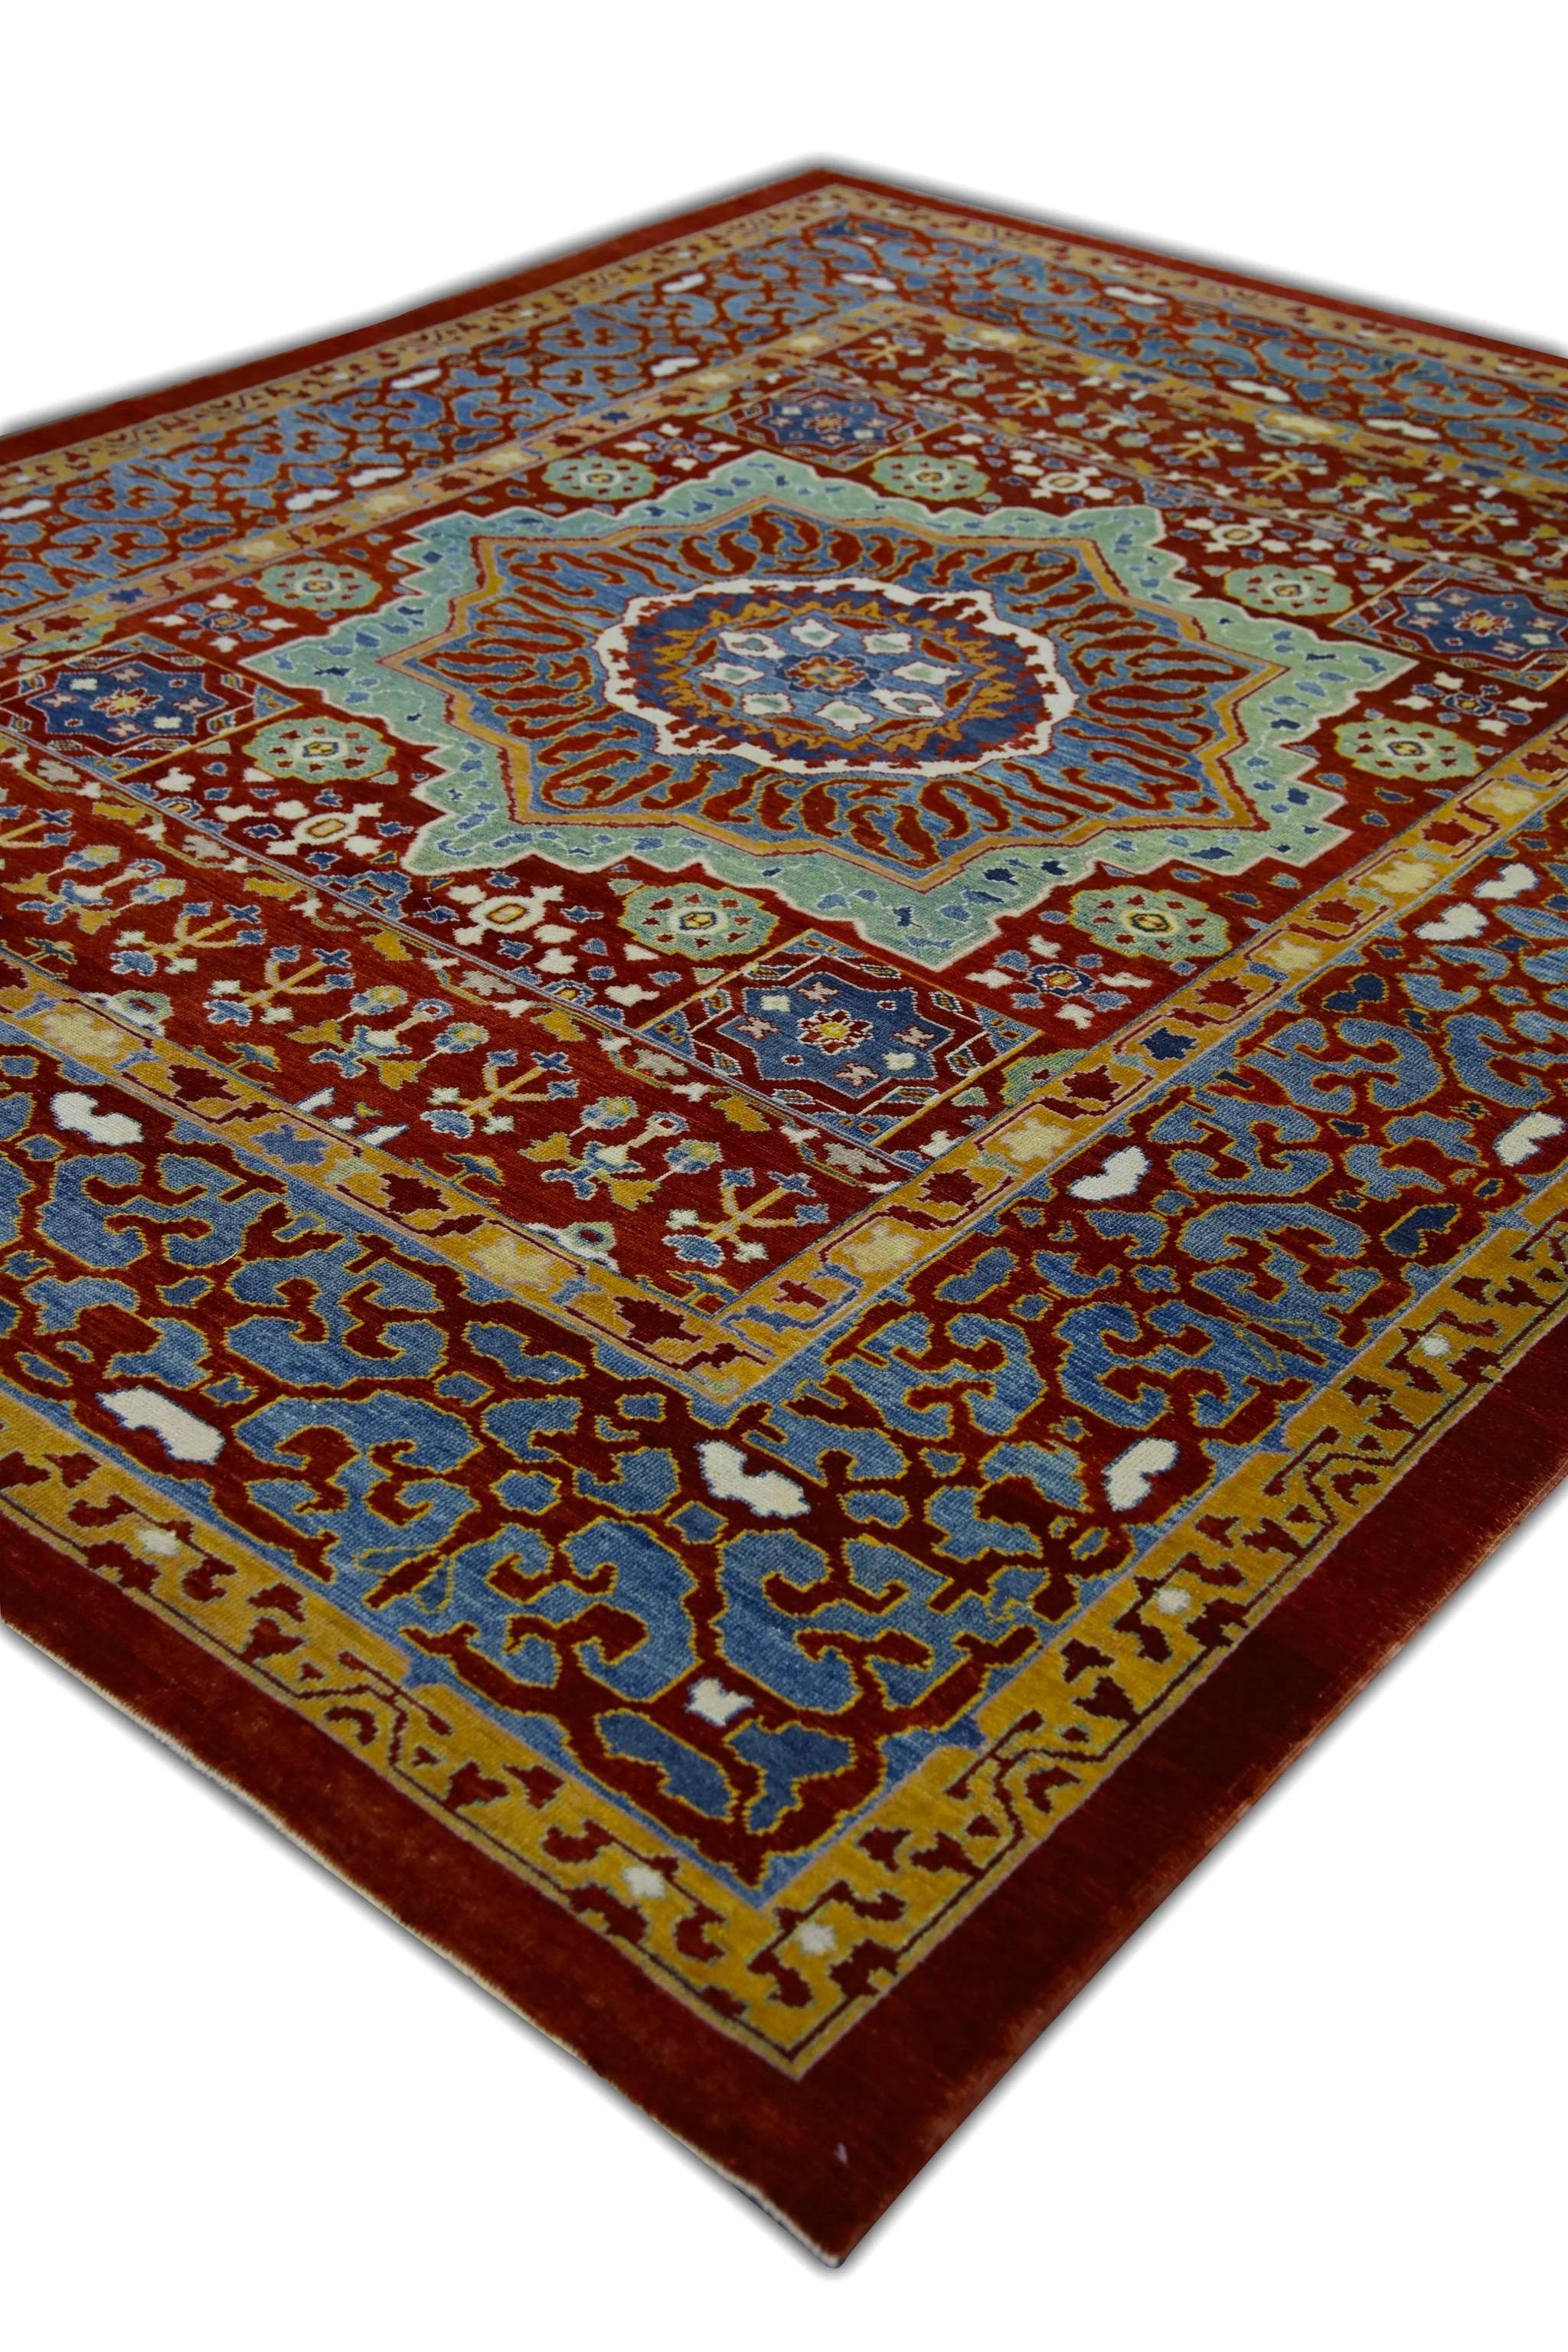 Contemporary Red and Blue Floral Pattern Turkish Finewoven Wool Oushak Rug 8'2